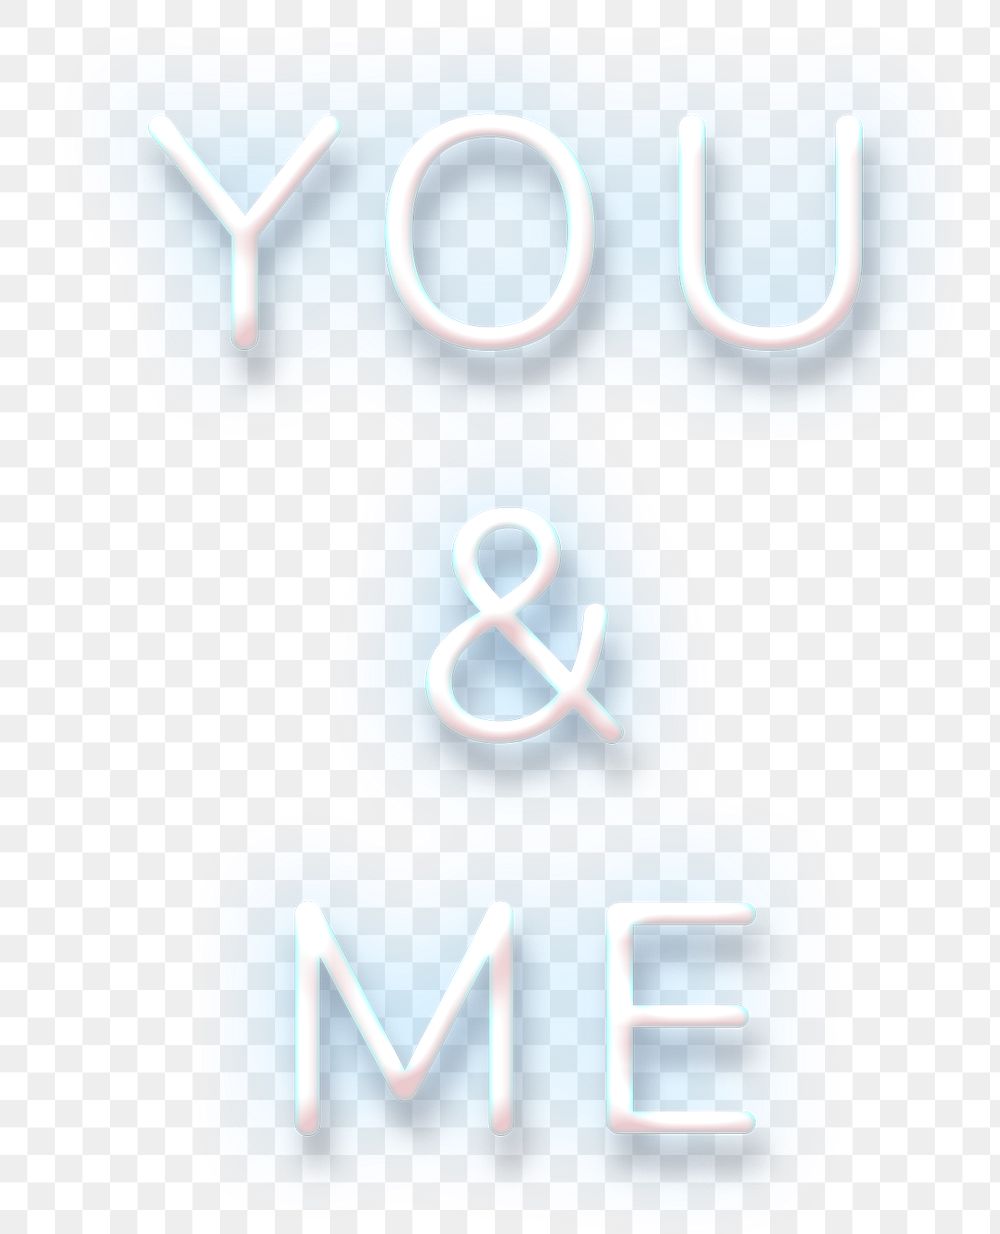 Glowing You&Me blue neon typography design element